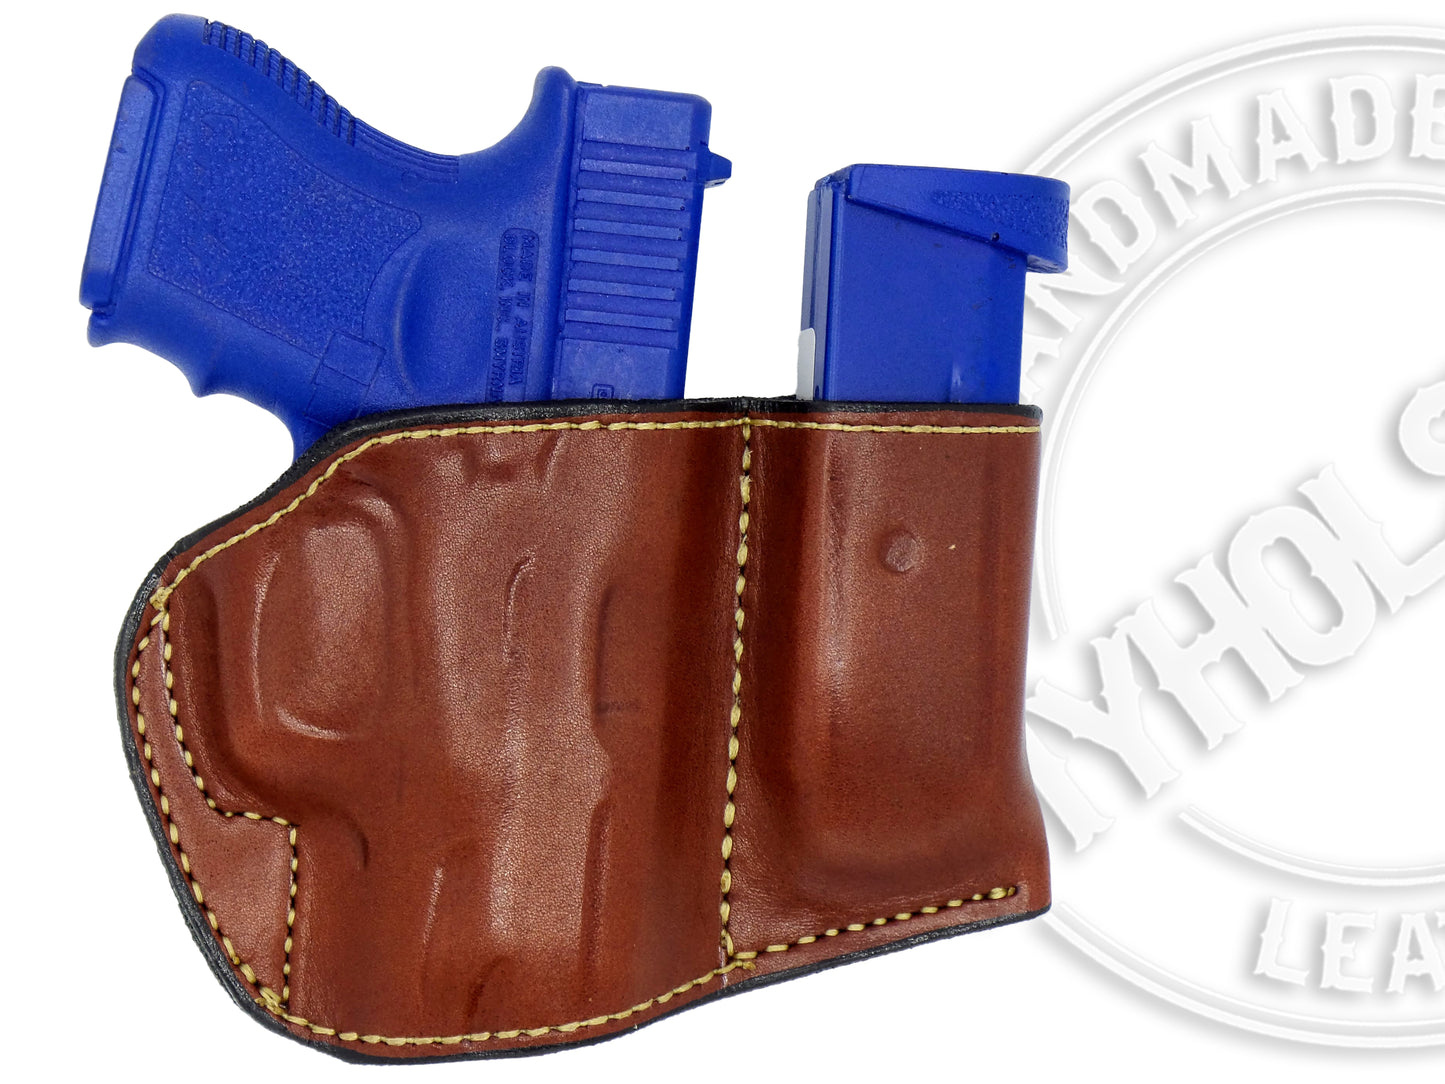 GLOCK 43X  Holster and Mag Pouch Combo - OWB Leather Belt Holster